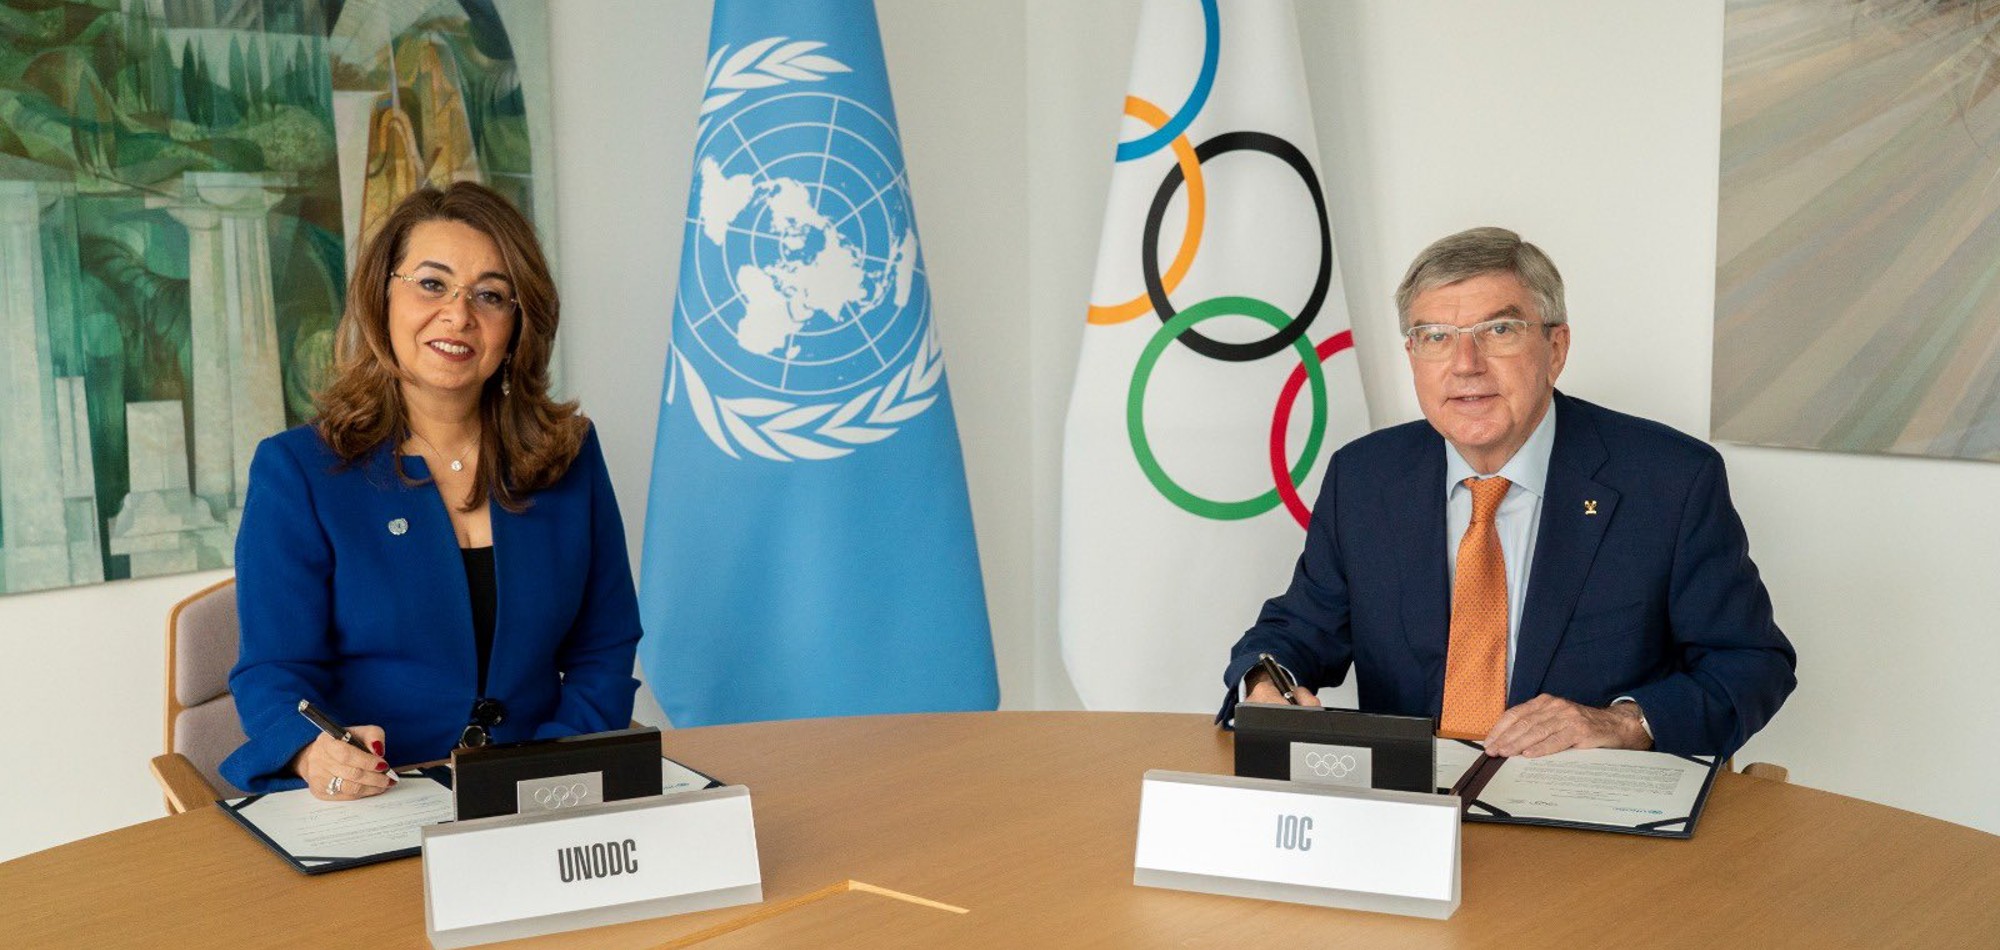 IOC and UNODC Extend Collaboration to Fight Corruption and Crime in Sport